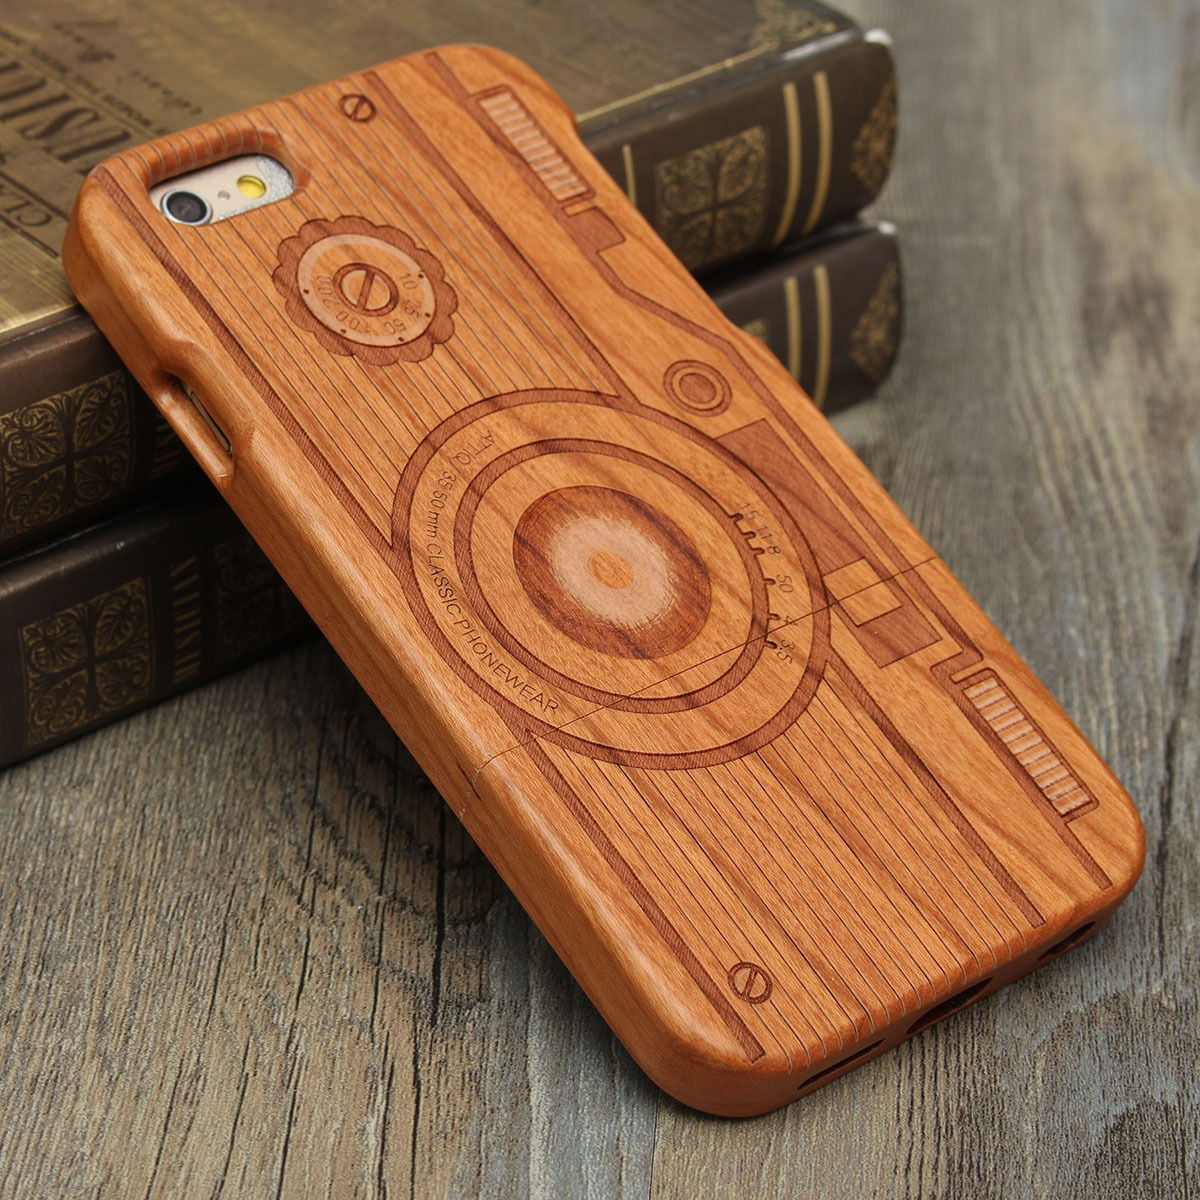 Luxury Natural Wood Wooden Bamboo Hard Cover Phone Case For Apple Iphone 6/6s/plus, Camera